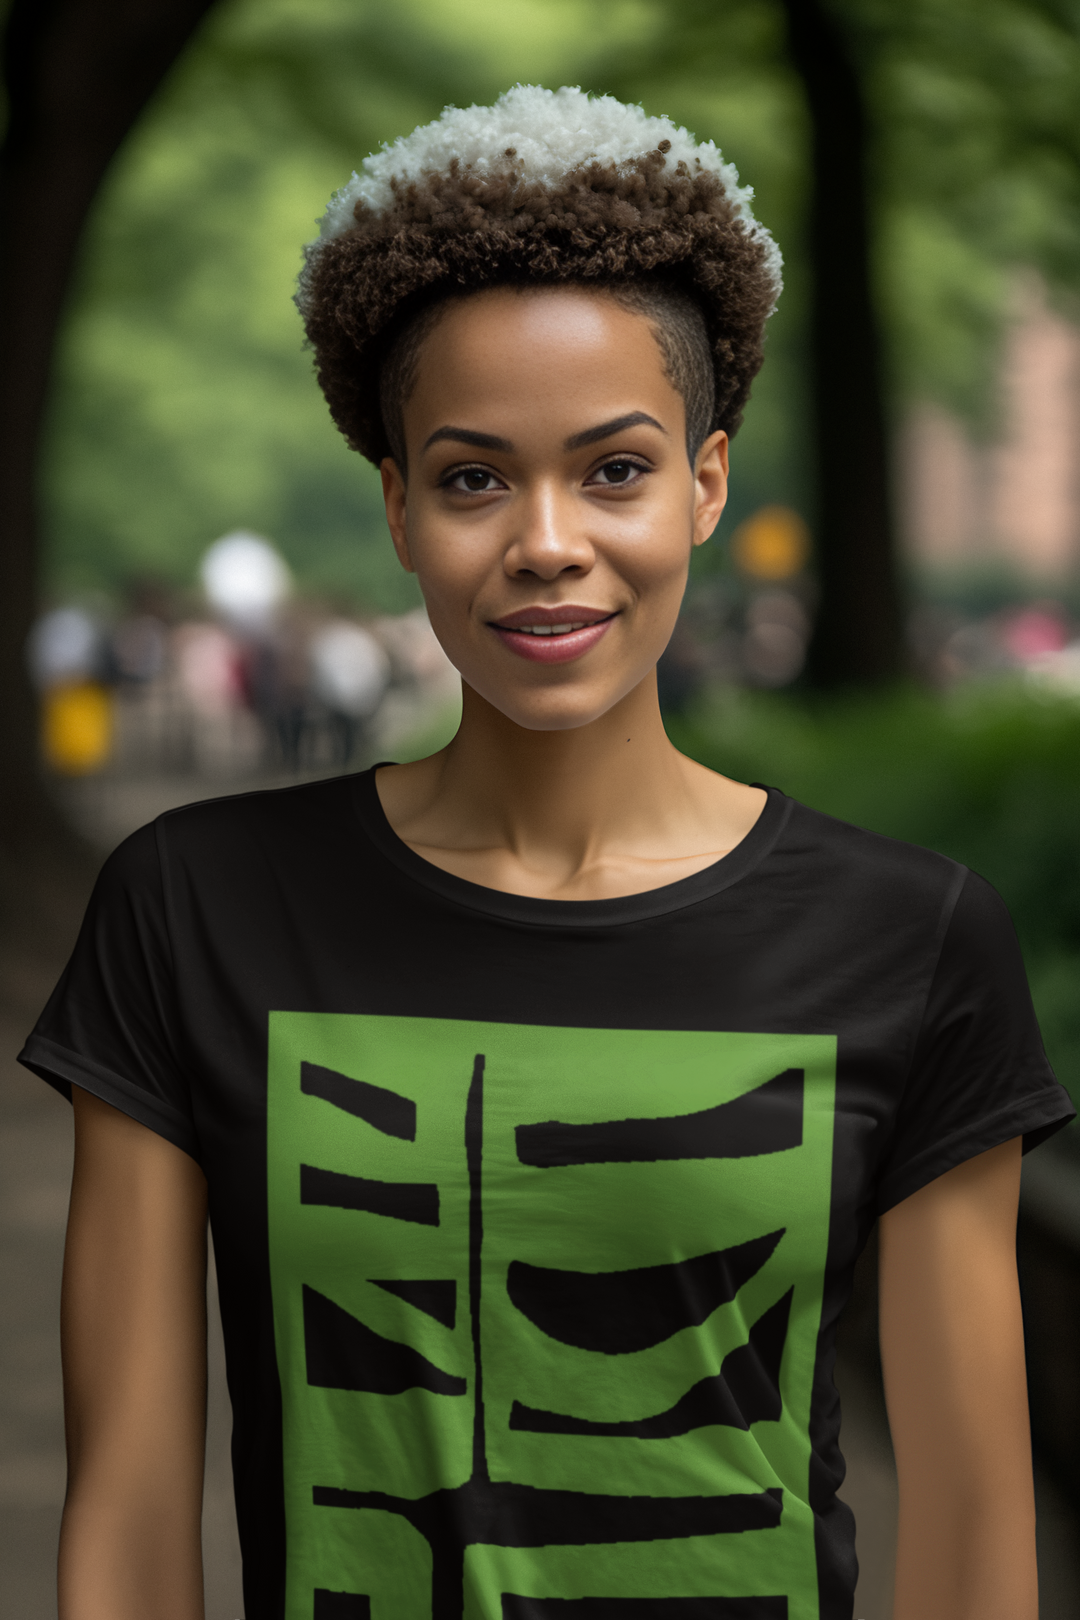 woman with an edgy haircut in central park wearing abstract t shirt BI 500 in green